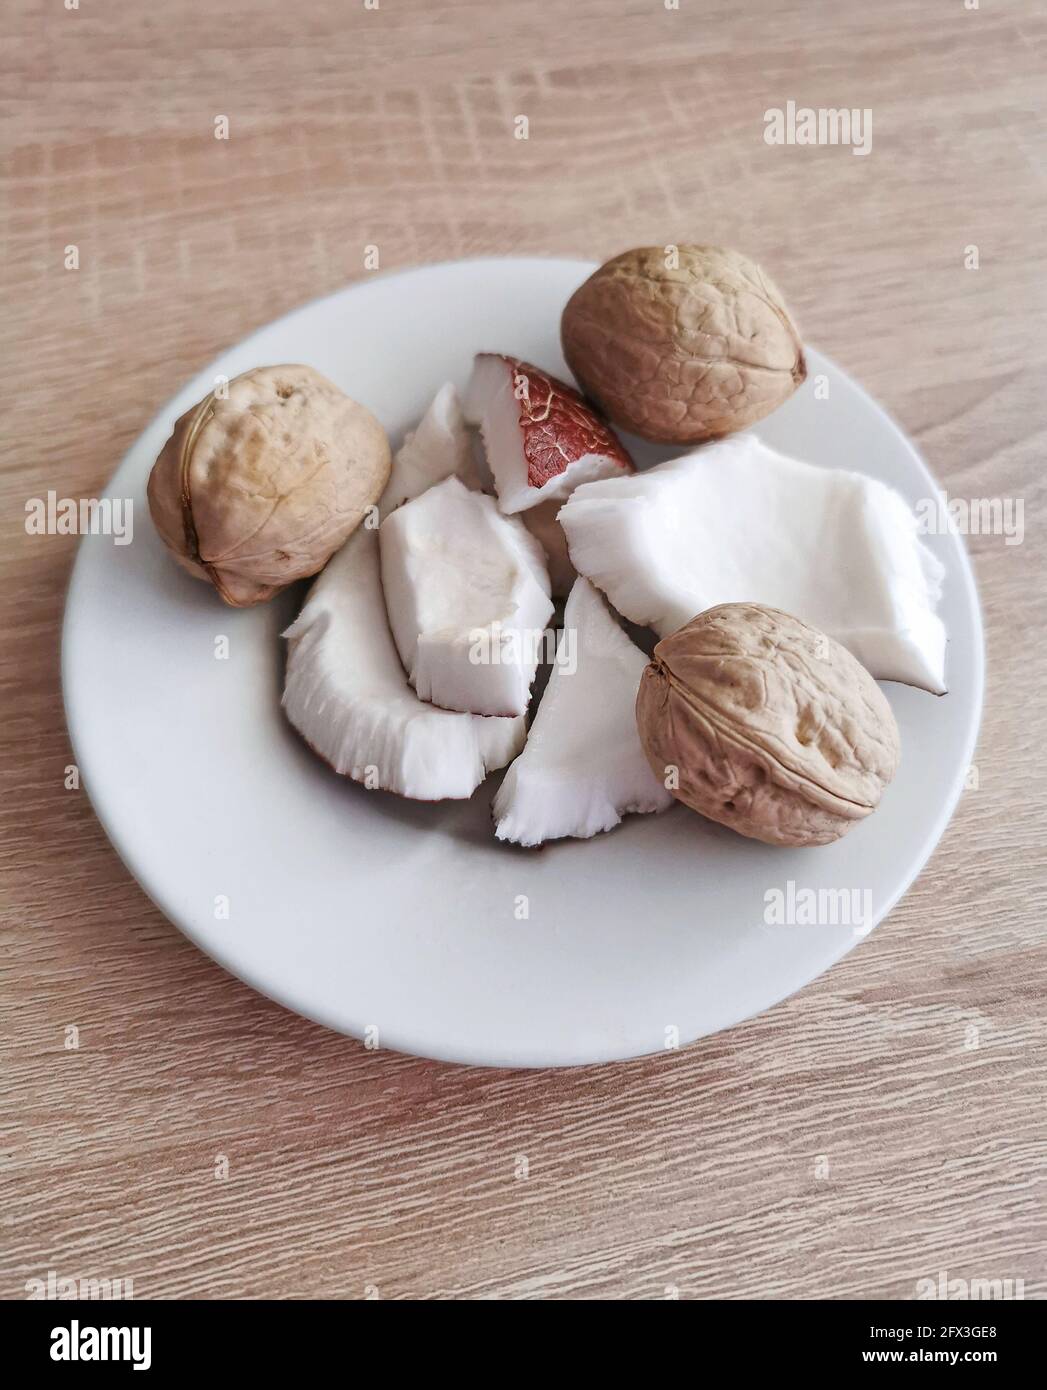 Nuts. Fresh coconut pieces and walnuts. Omega 3 and omega 6 fatty acids, healthy protein, vitamins and minerals Stock Photo